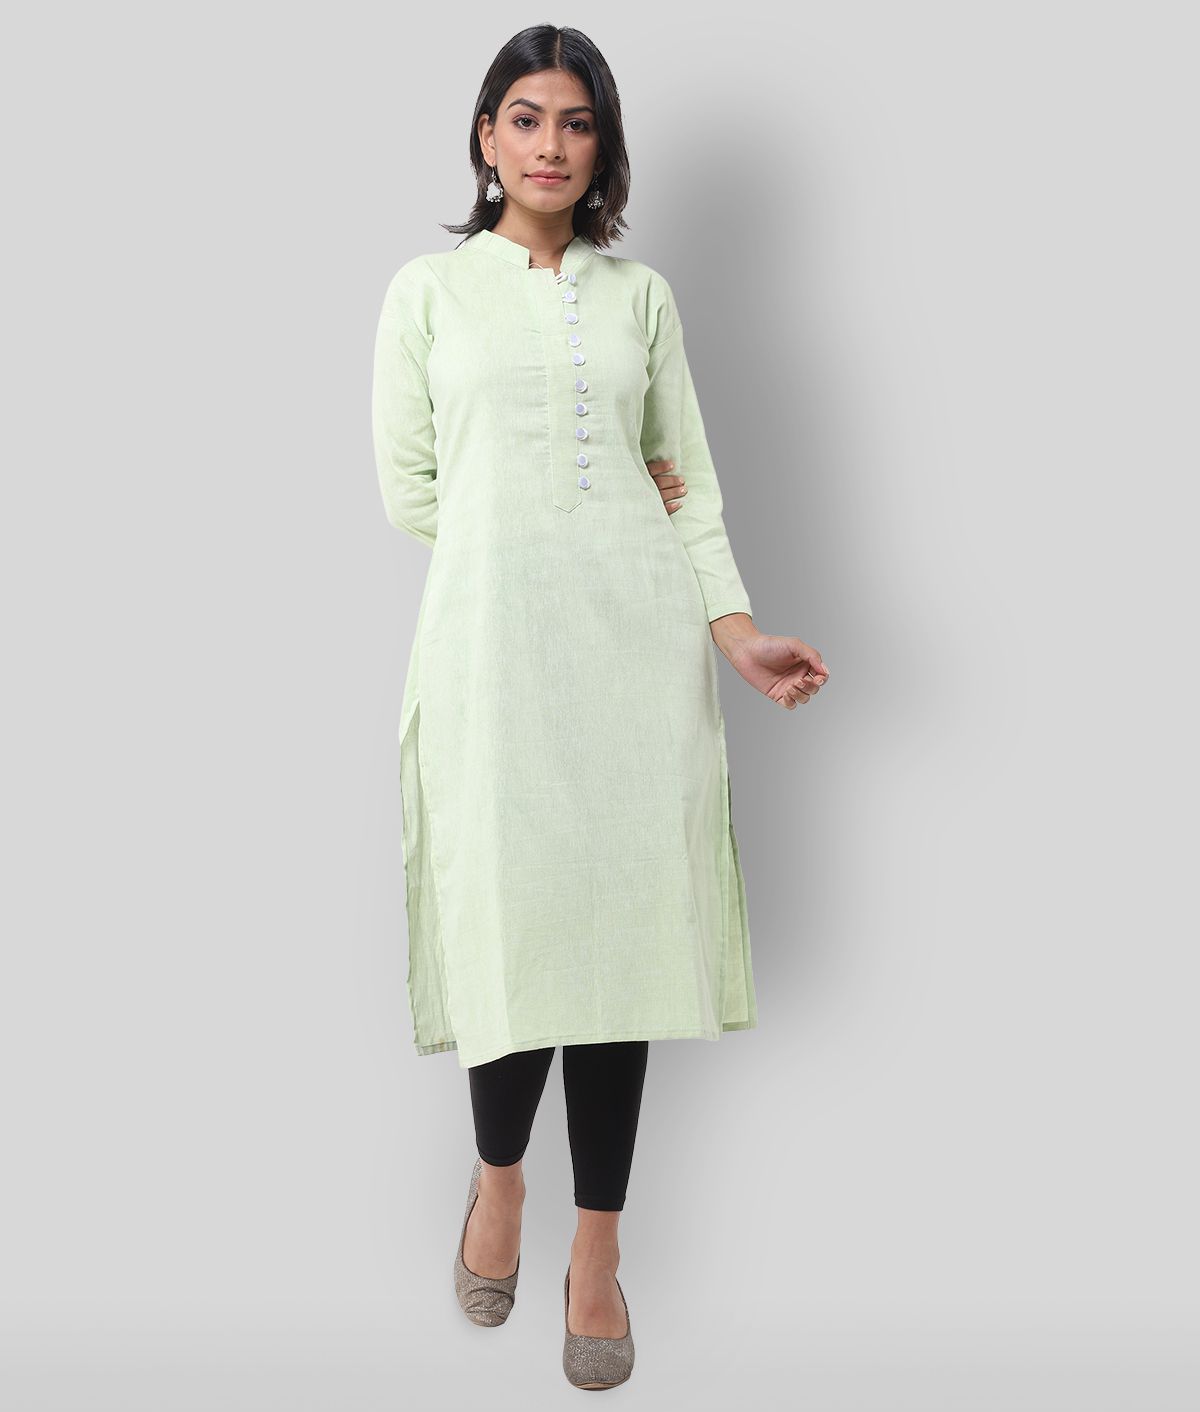 SVARCHI  Blue Cotton Womens Straight Kurti  Buy SVARCHI  Blue Cotton  Womens Straight Kurti Online at Best Prices in India on Snapdeal